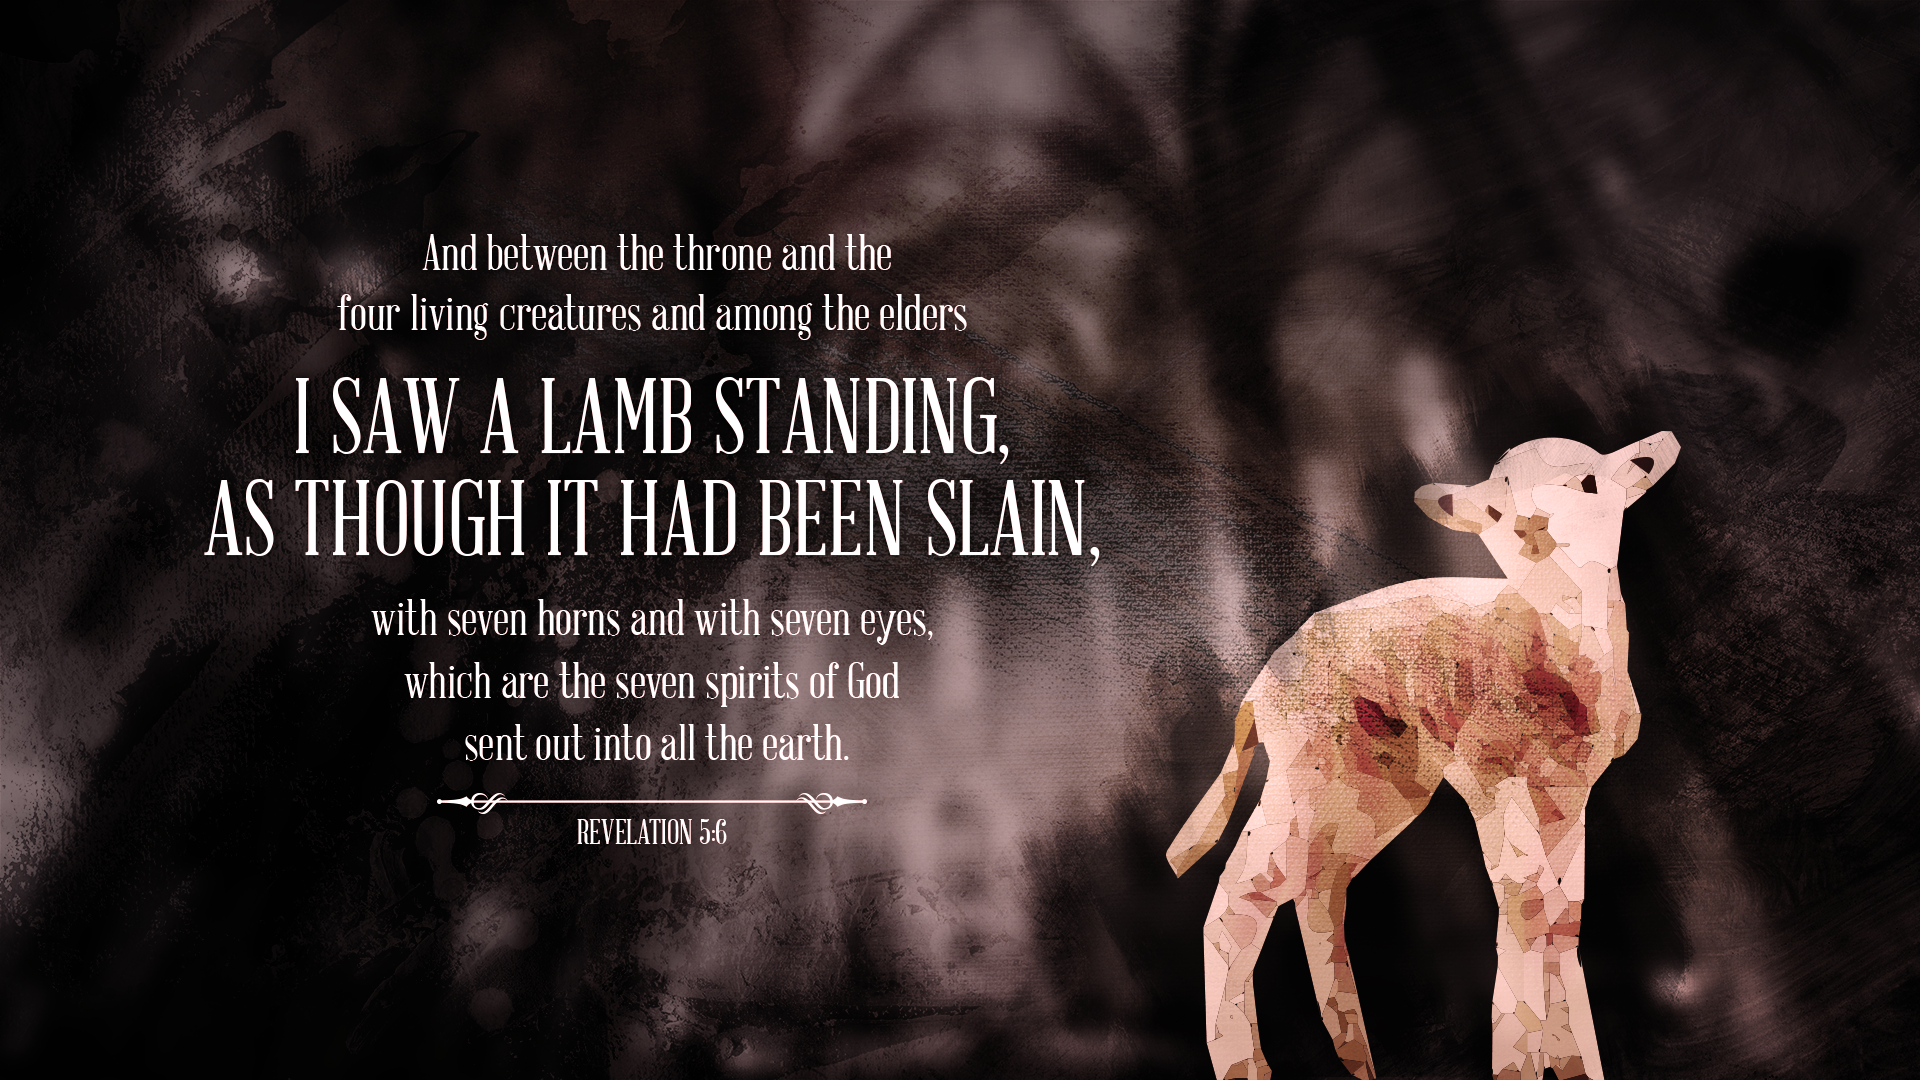 The Lamb And The Lion (Revelation 5:5 6)